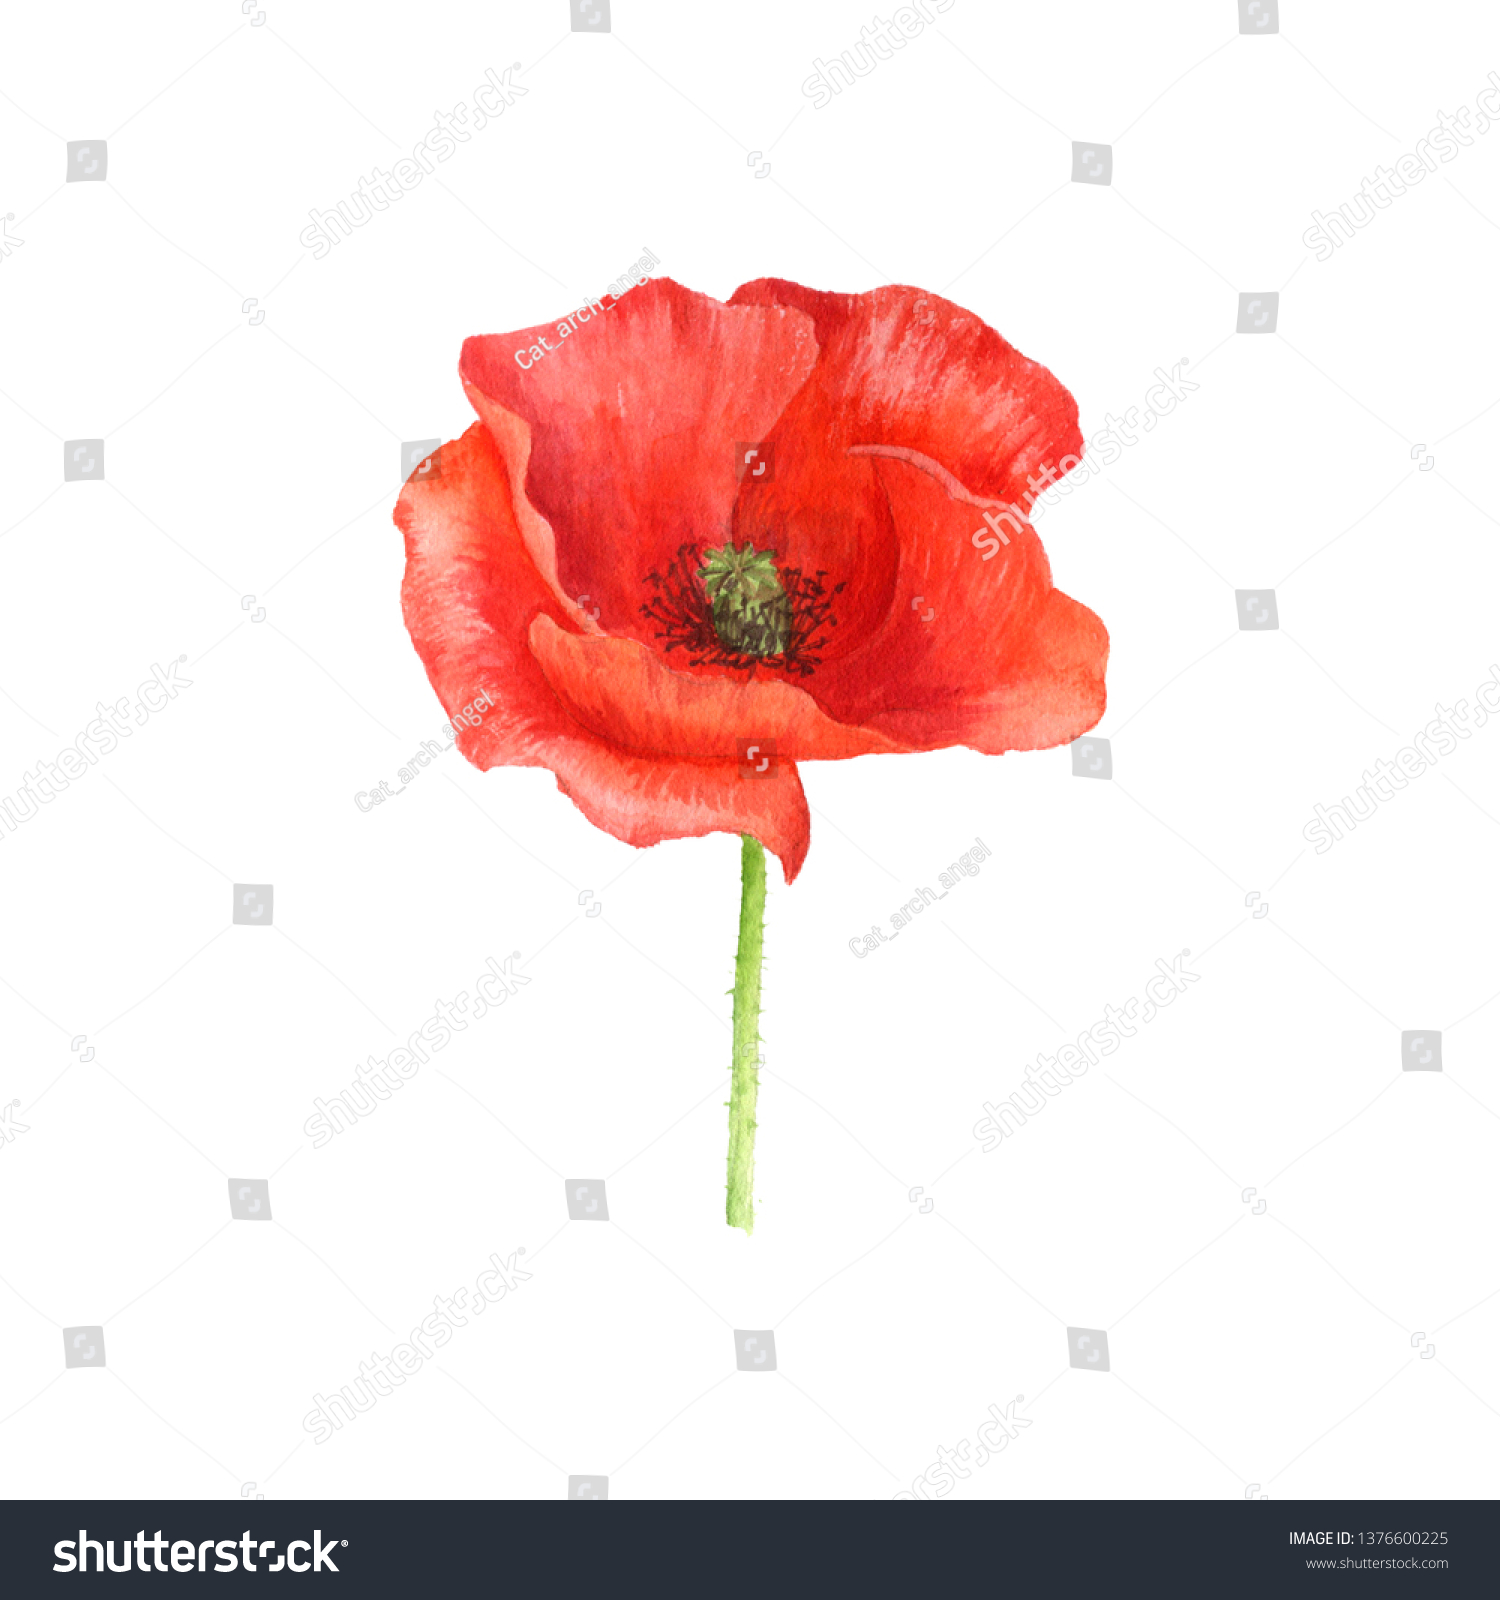 Watercolor Drawing Red Poppy Flower Isolated Stock Illustration